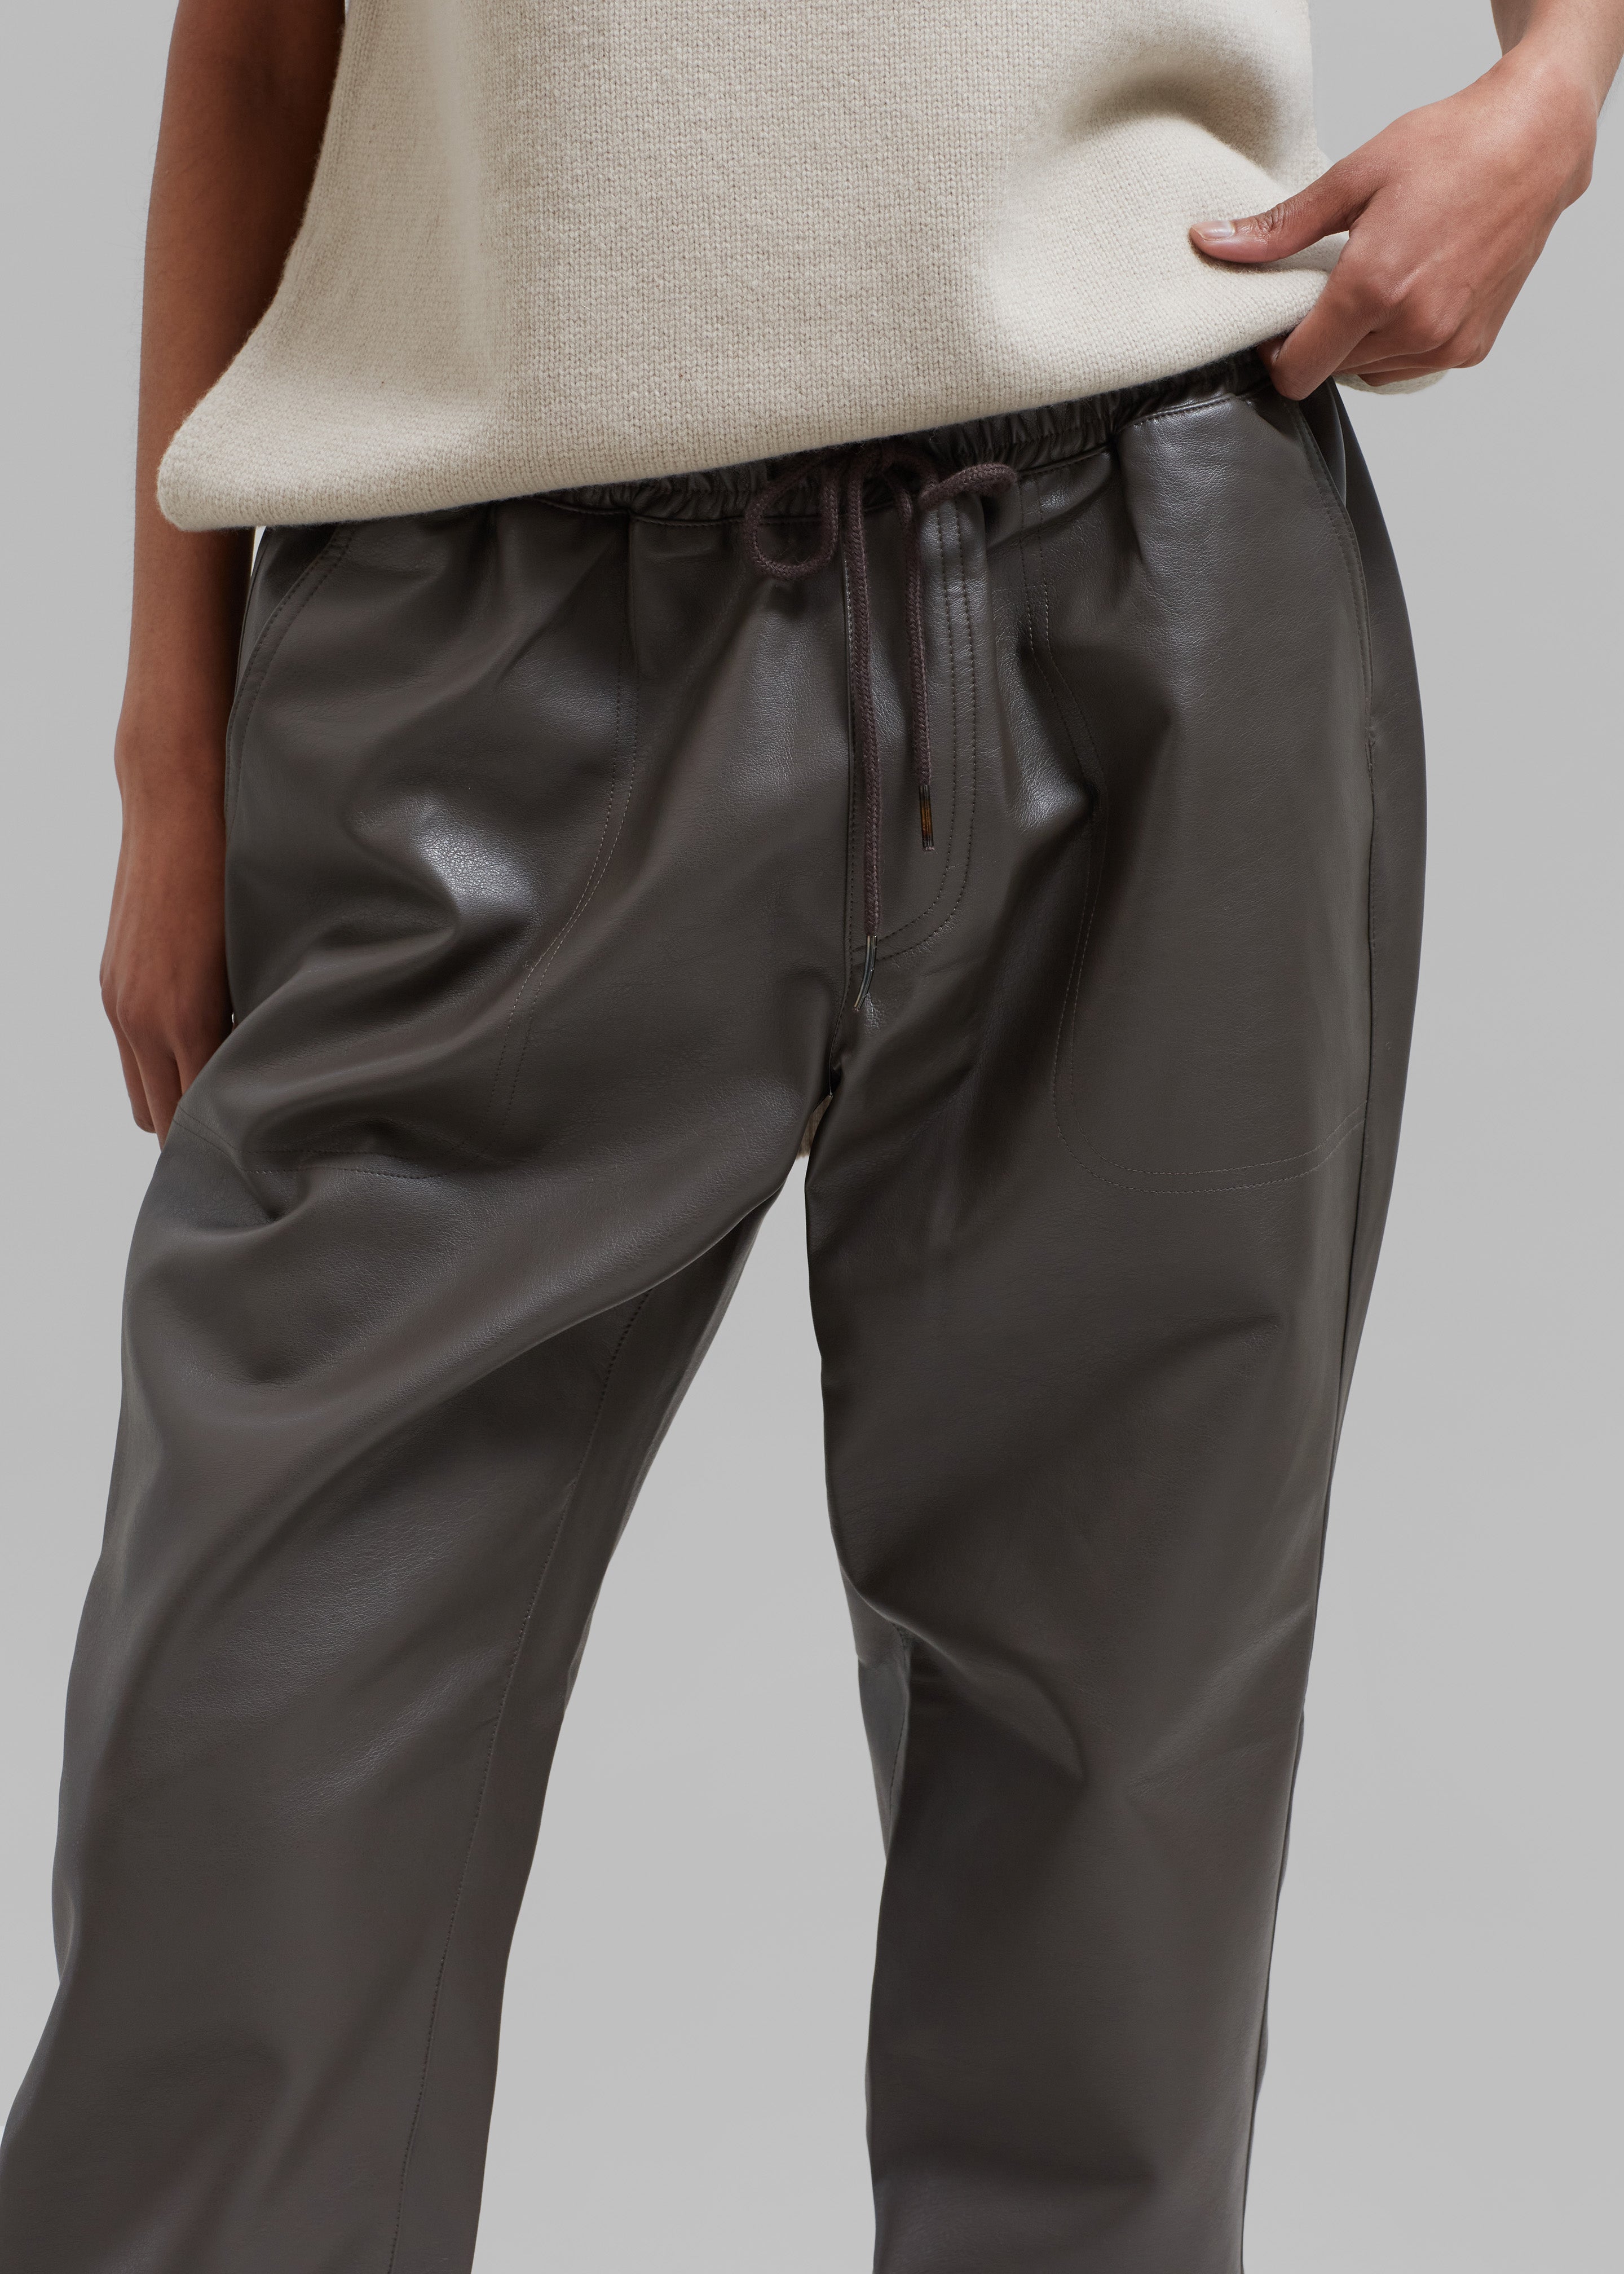 NEW Faux Leather Joggers in Brown!